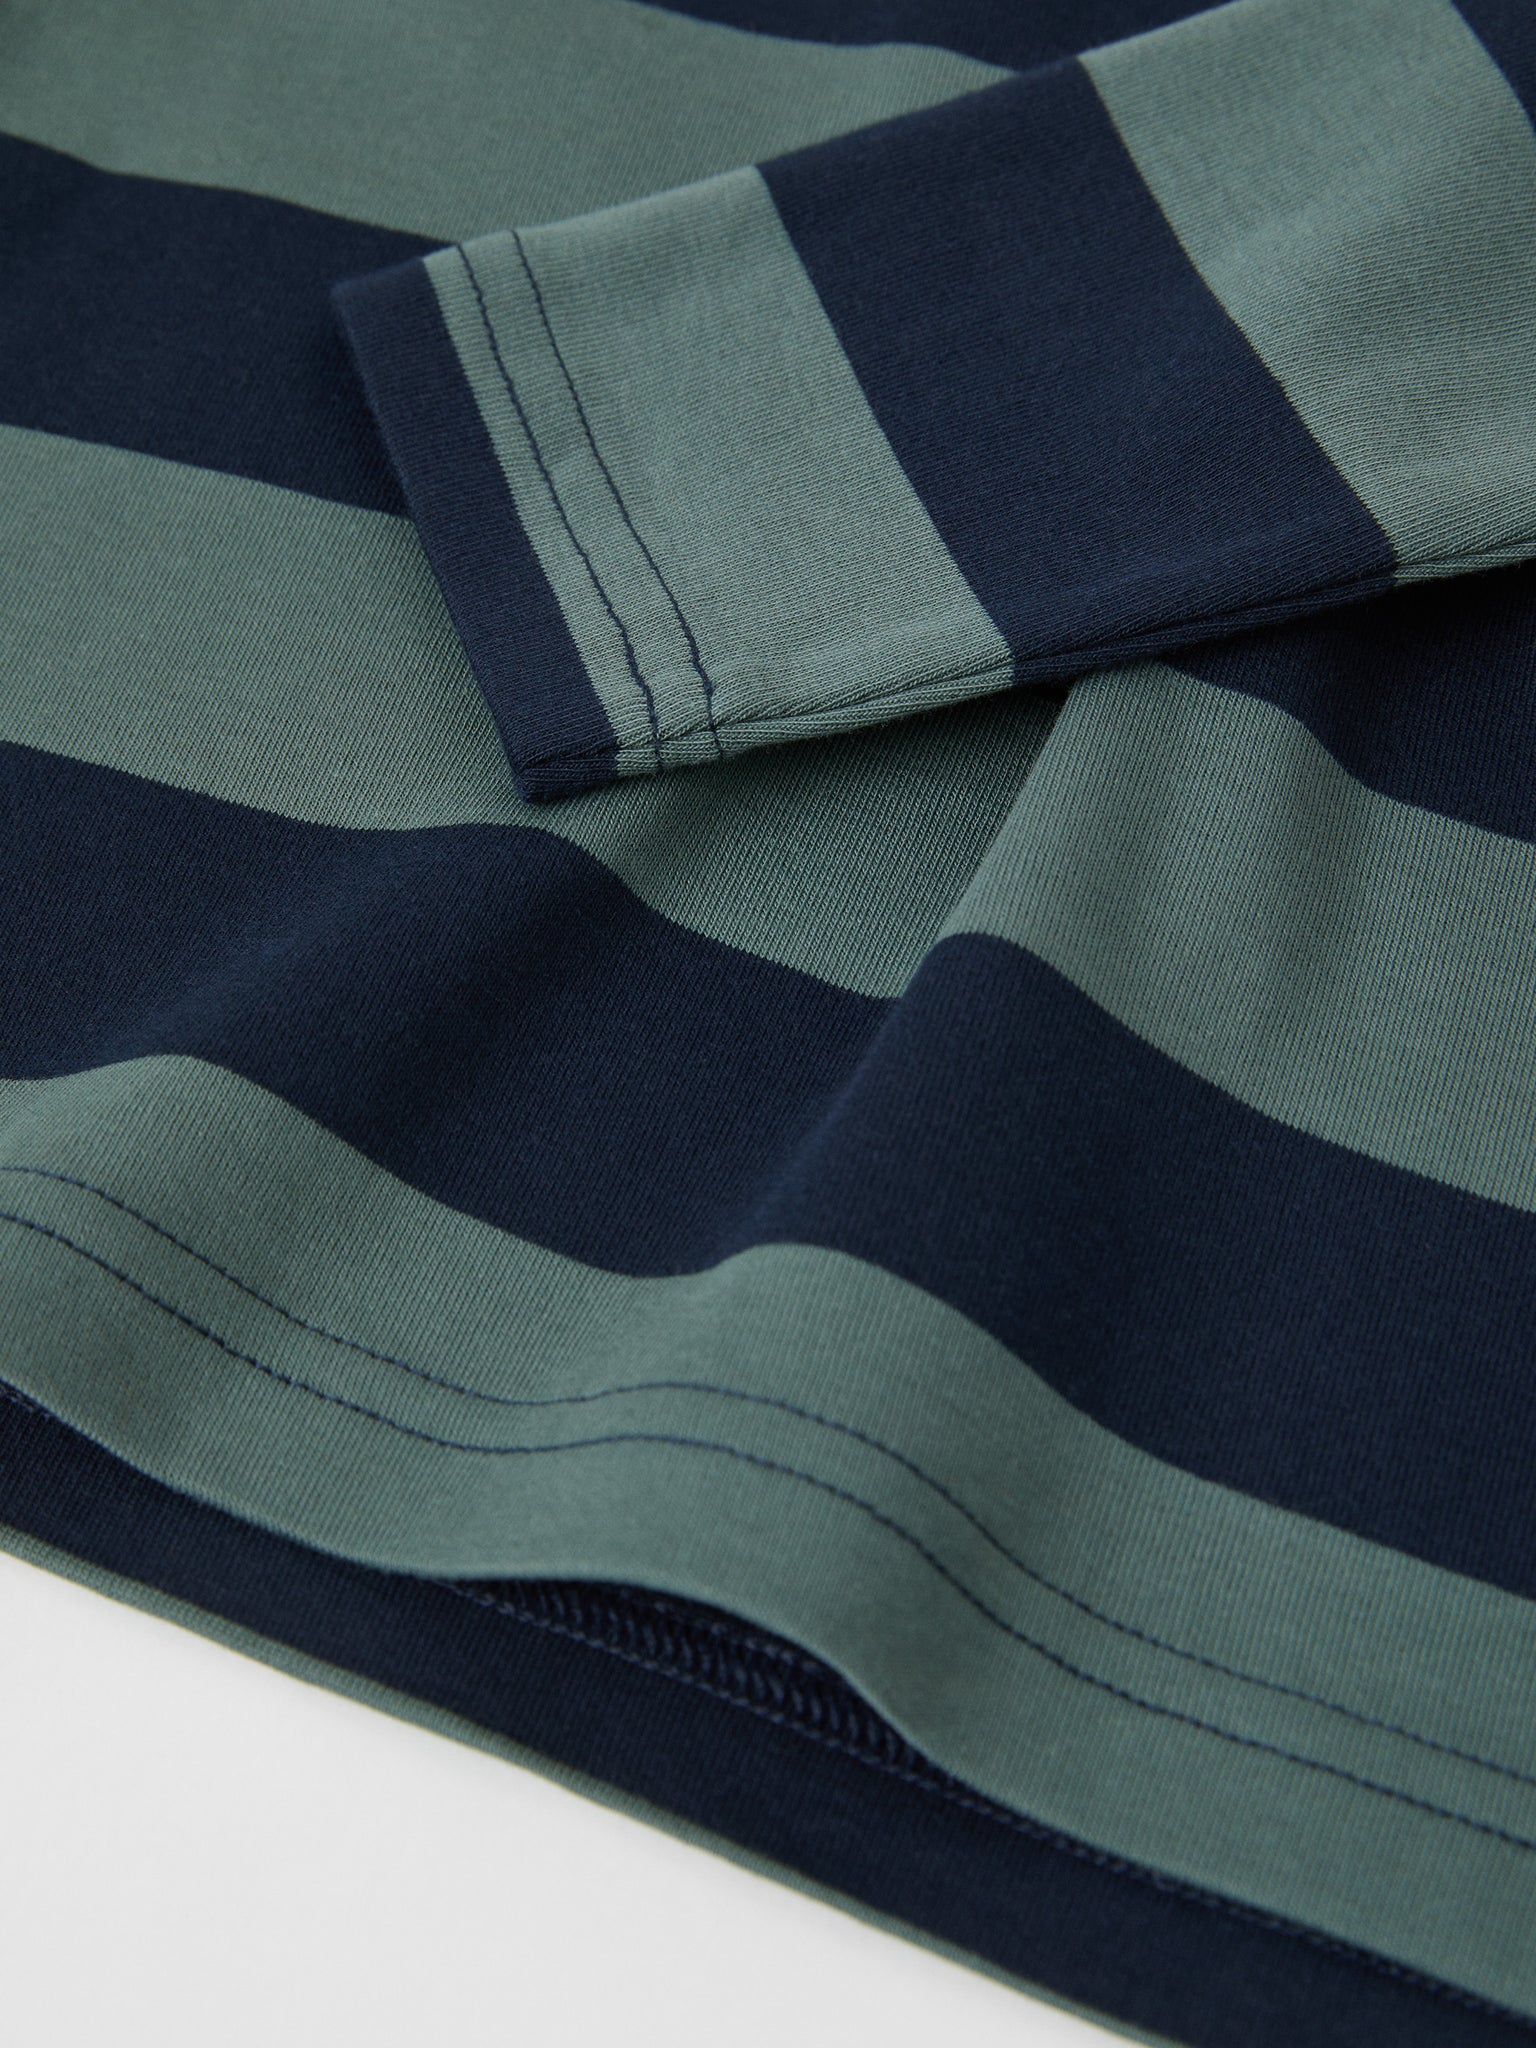 Organic Cotton Green Striped Kids Top from the Polarn O. Pyret kidswear collection. The best ethical kids clothes